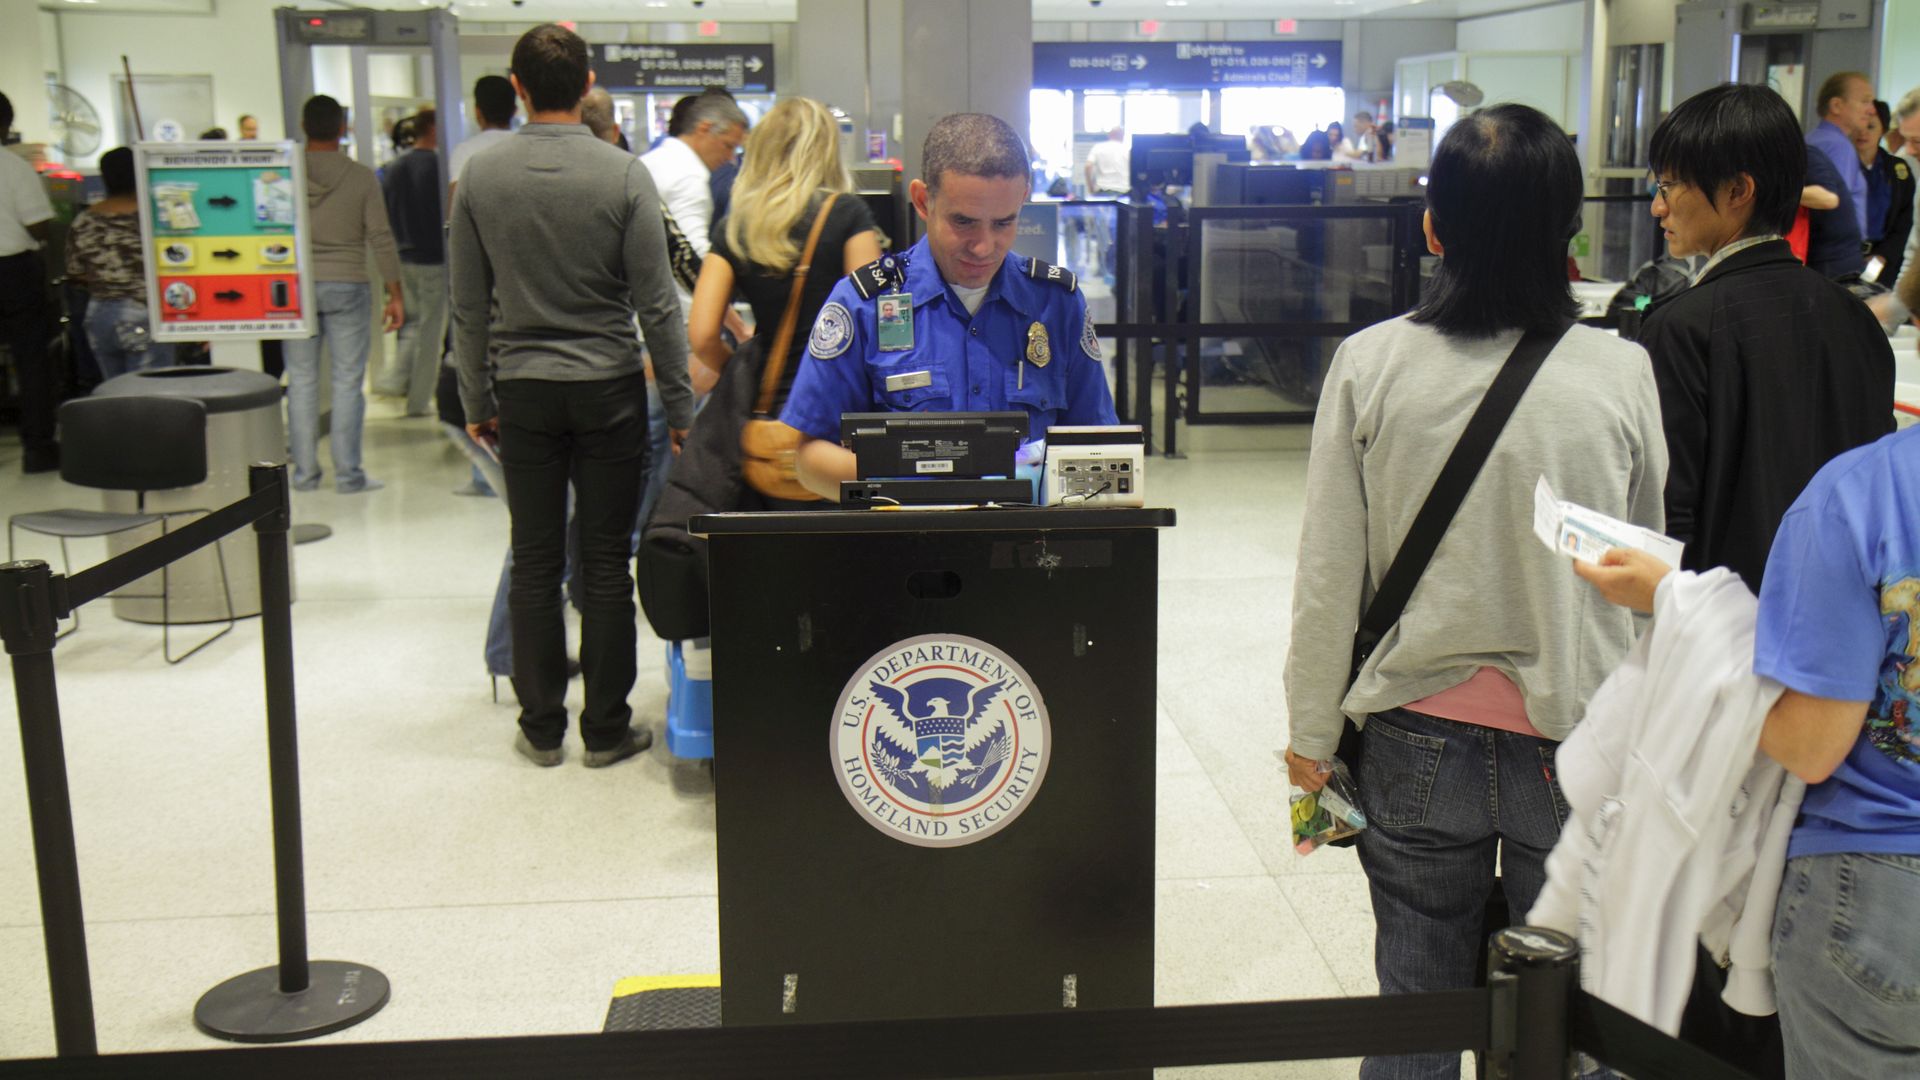 In this image, a man sits behind a DHS podium in an airport security line. A line of people stand next to him.